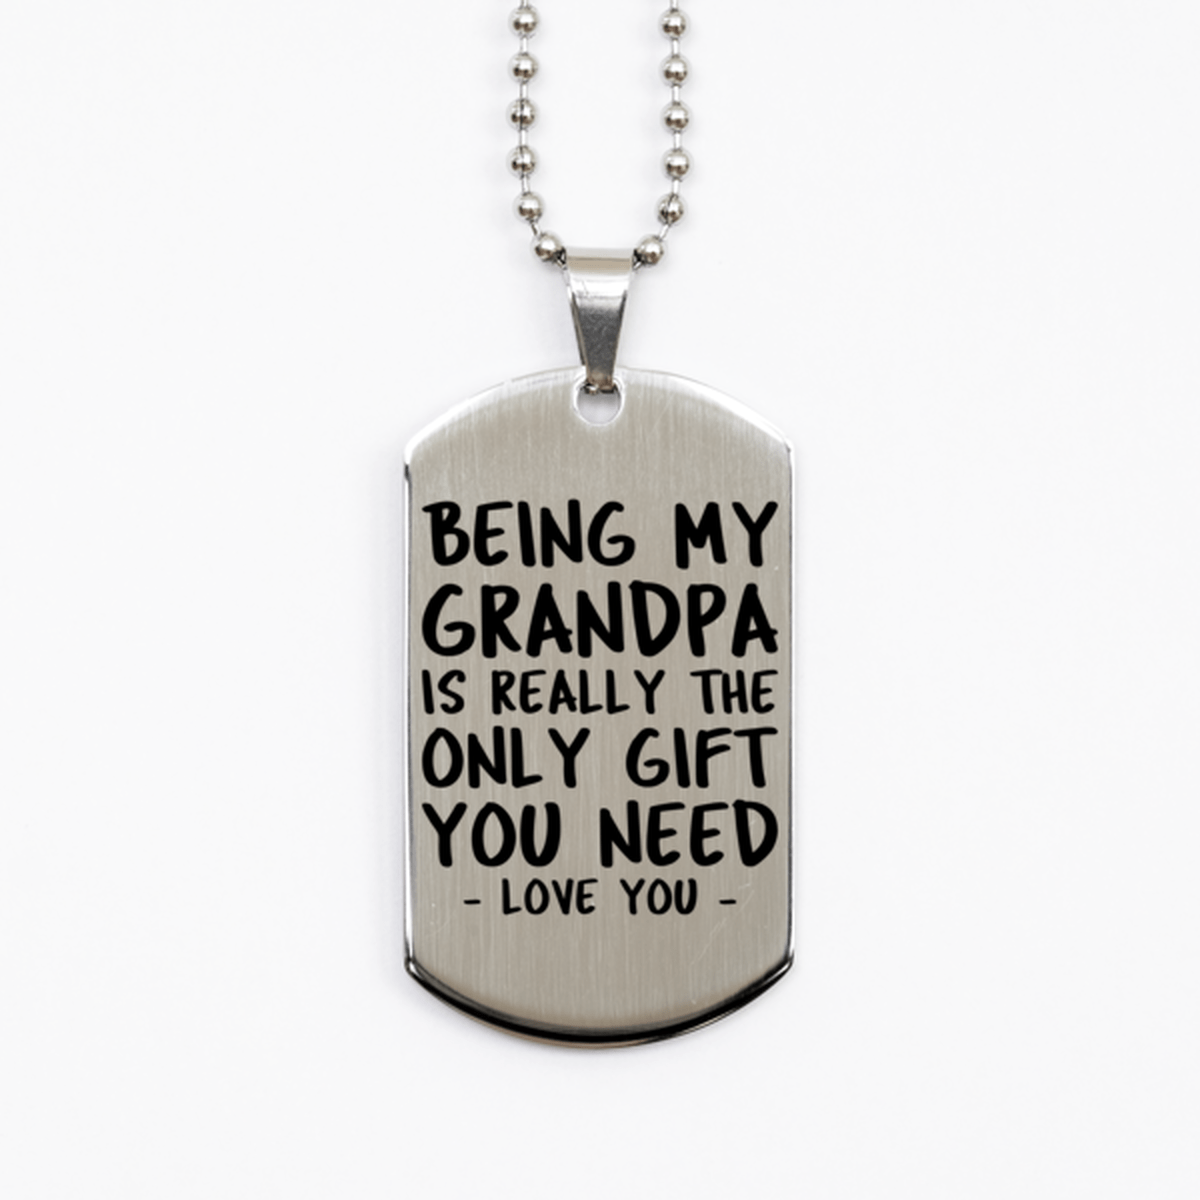 Funny Grandpa Silver Dog Tag Necklace, Being My Grandpa Is Really the Only Gift You Need, Best Birthday Gifts for Grandpa